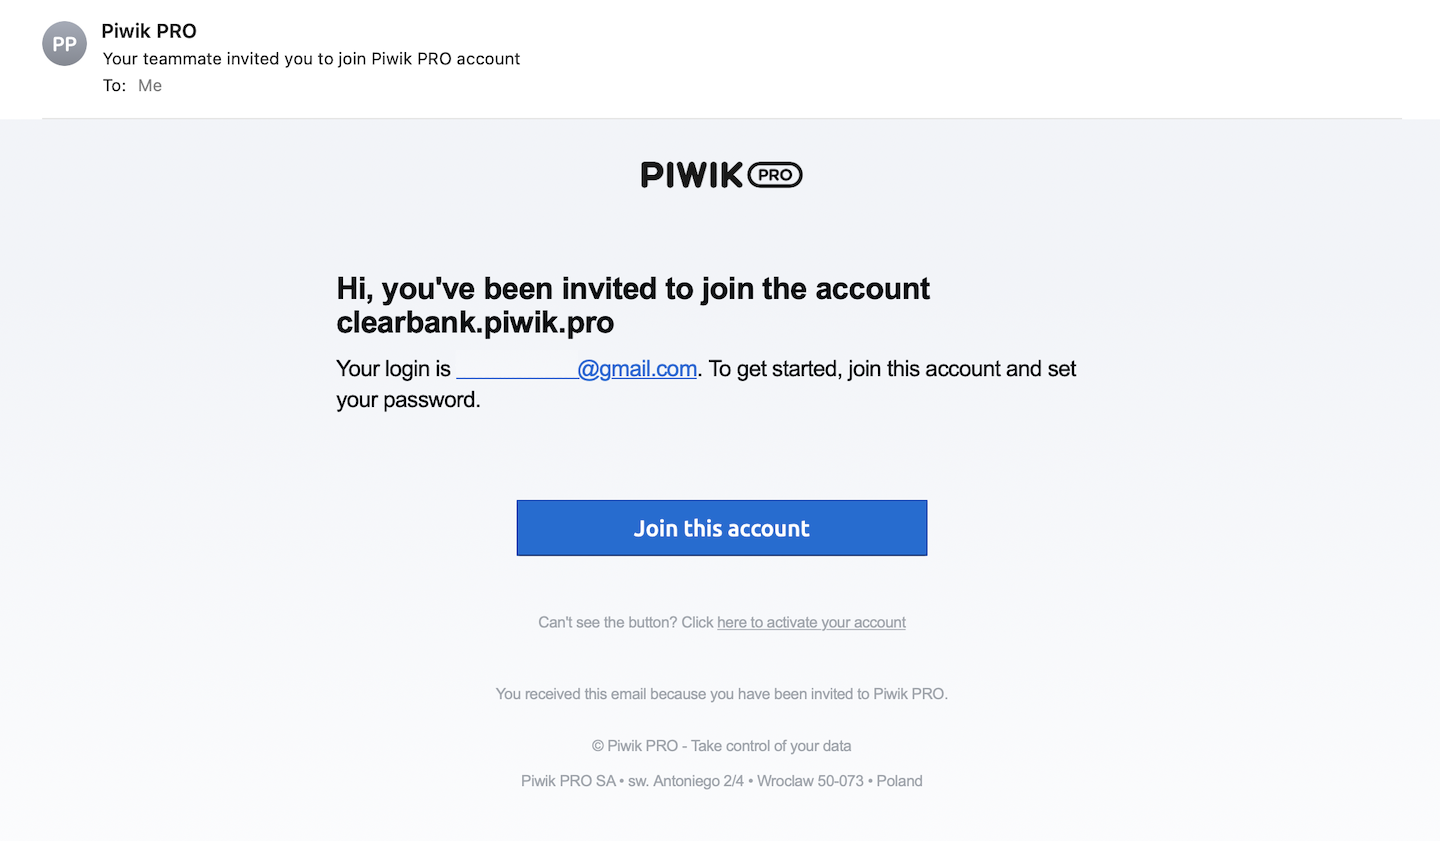 Invitation email from Piwik PRO